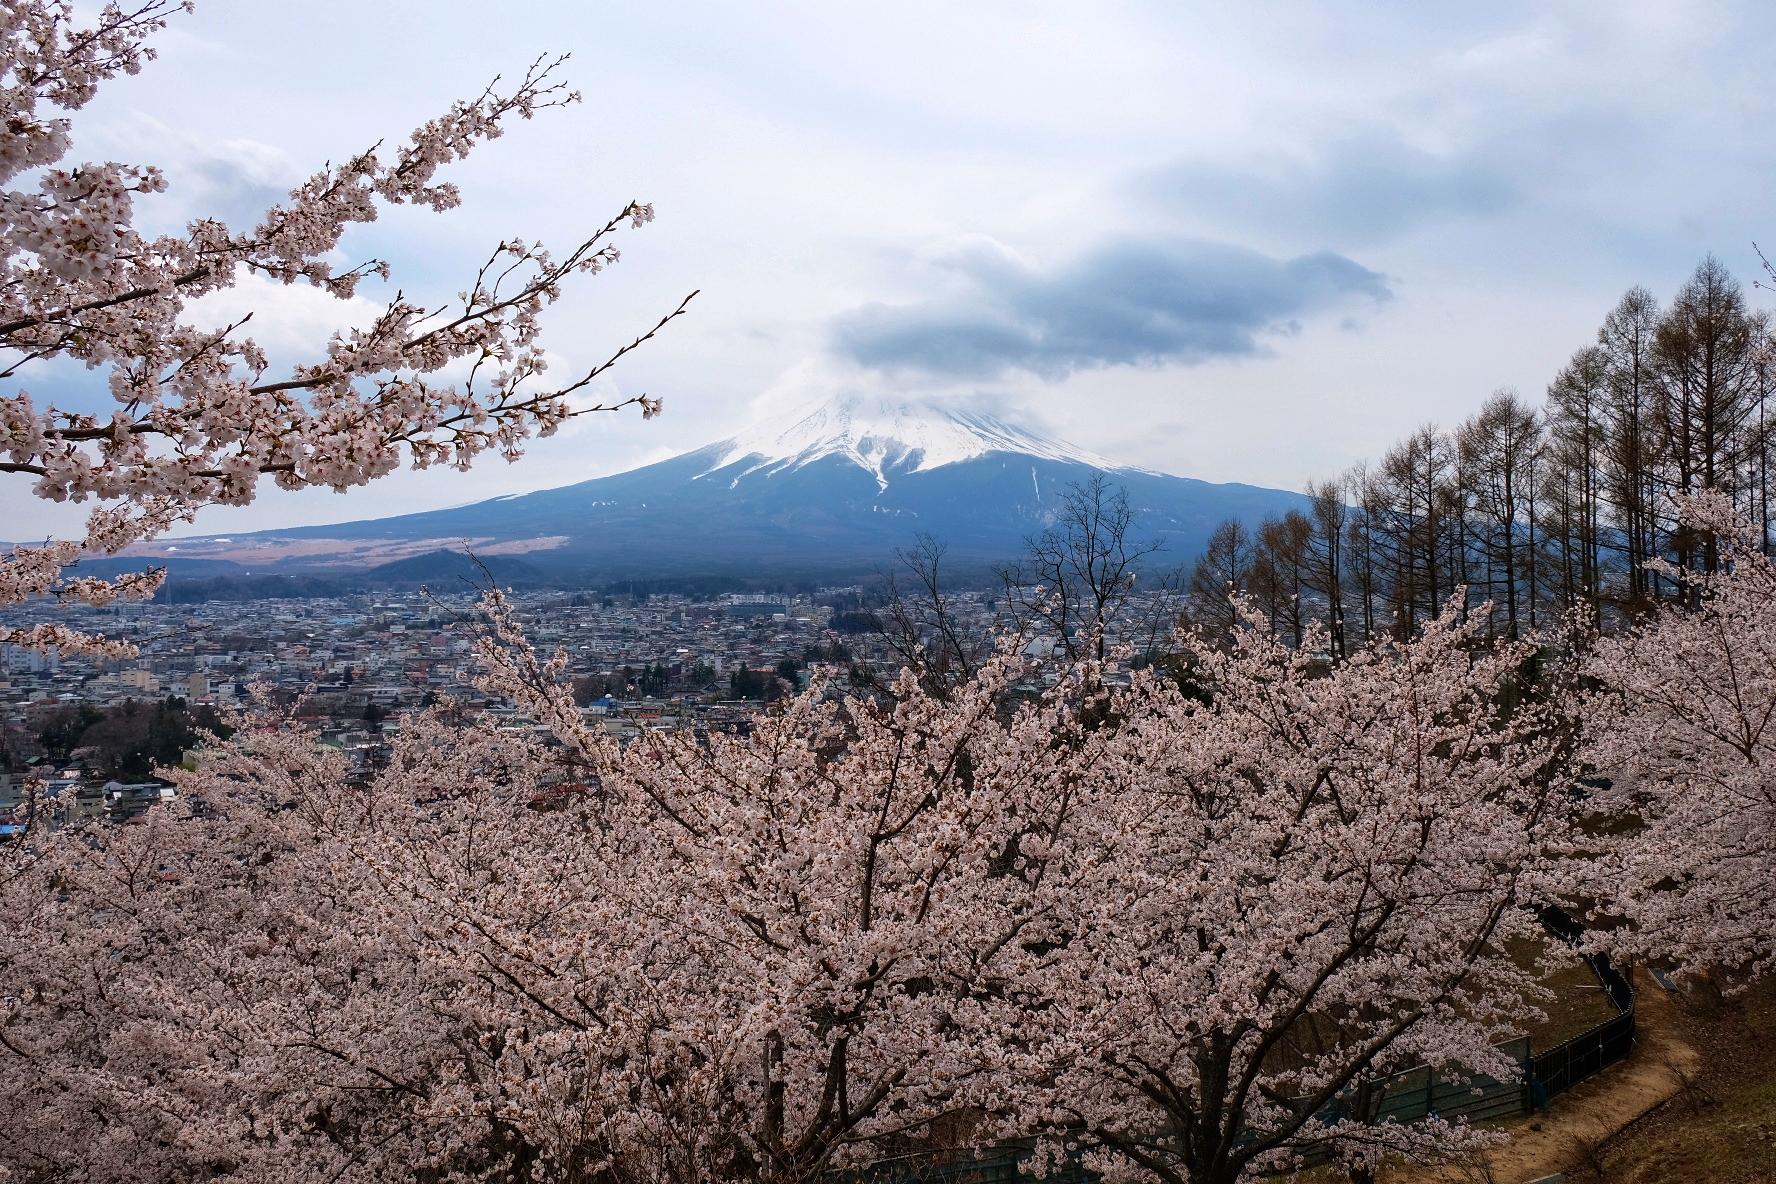 Mt. Fuji surrounded by nearby cherry blossoms